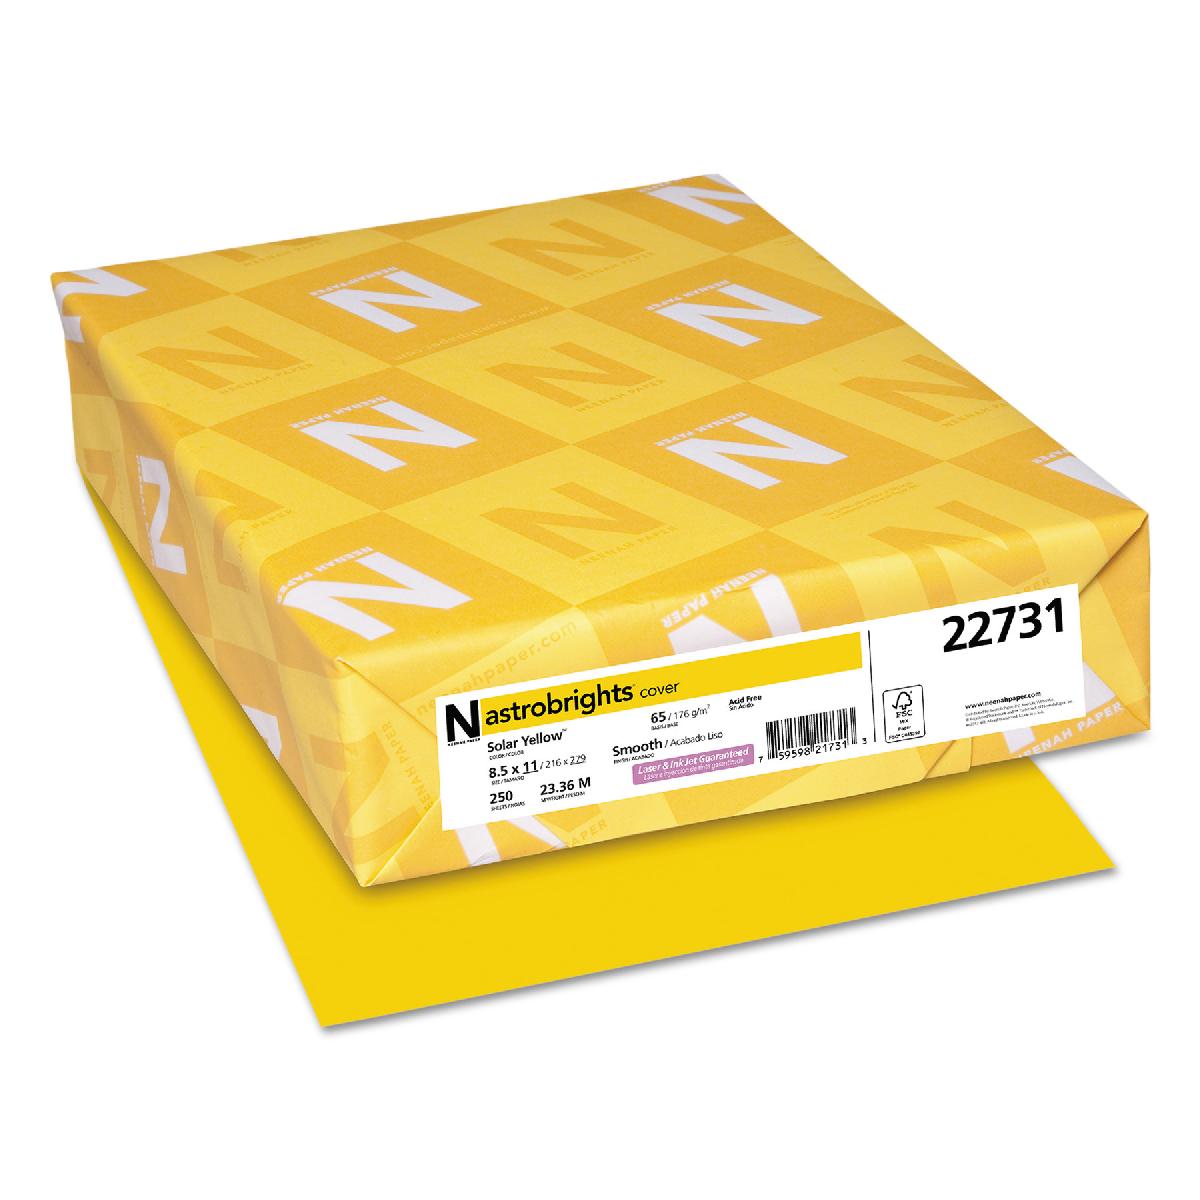 Neenah Paper® Astrobrights Solar Yellow Smooth 65 lb. Cover 8.5x11 in. 250 Sheets